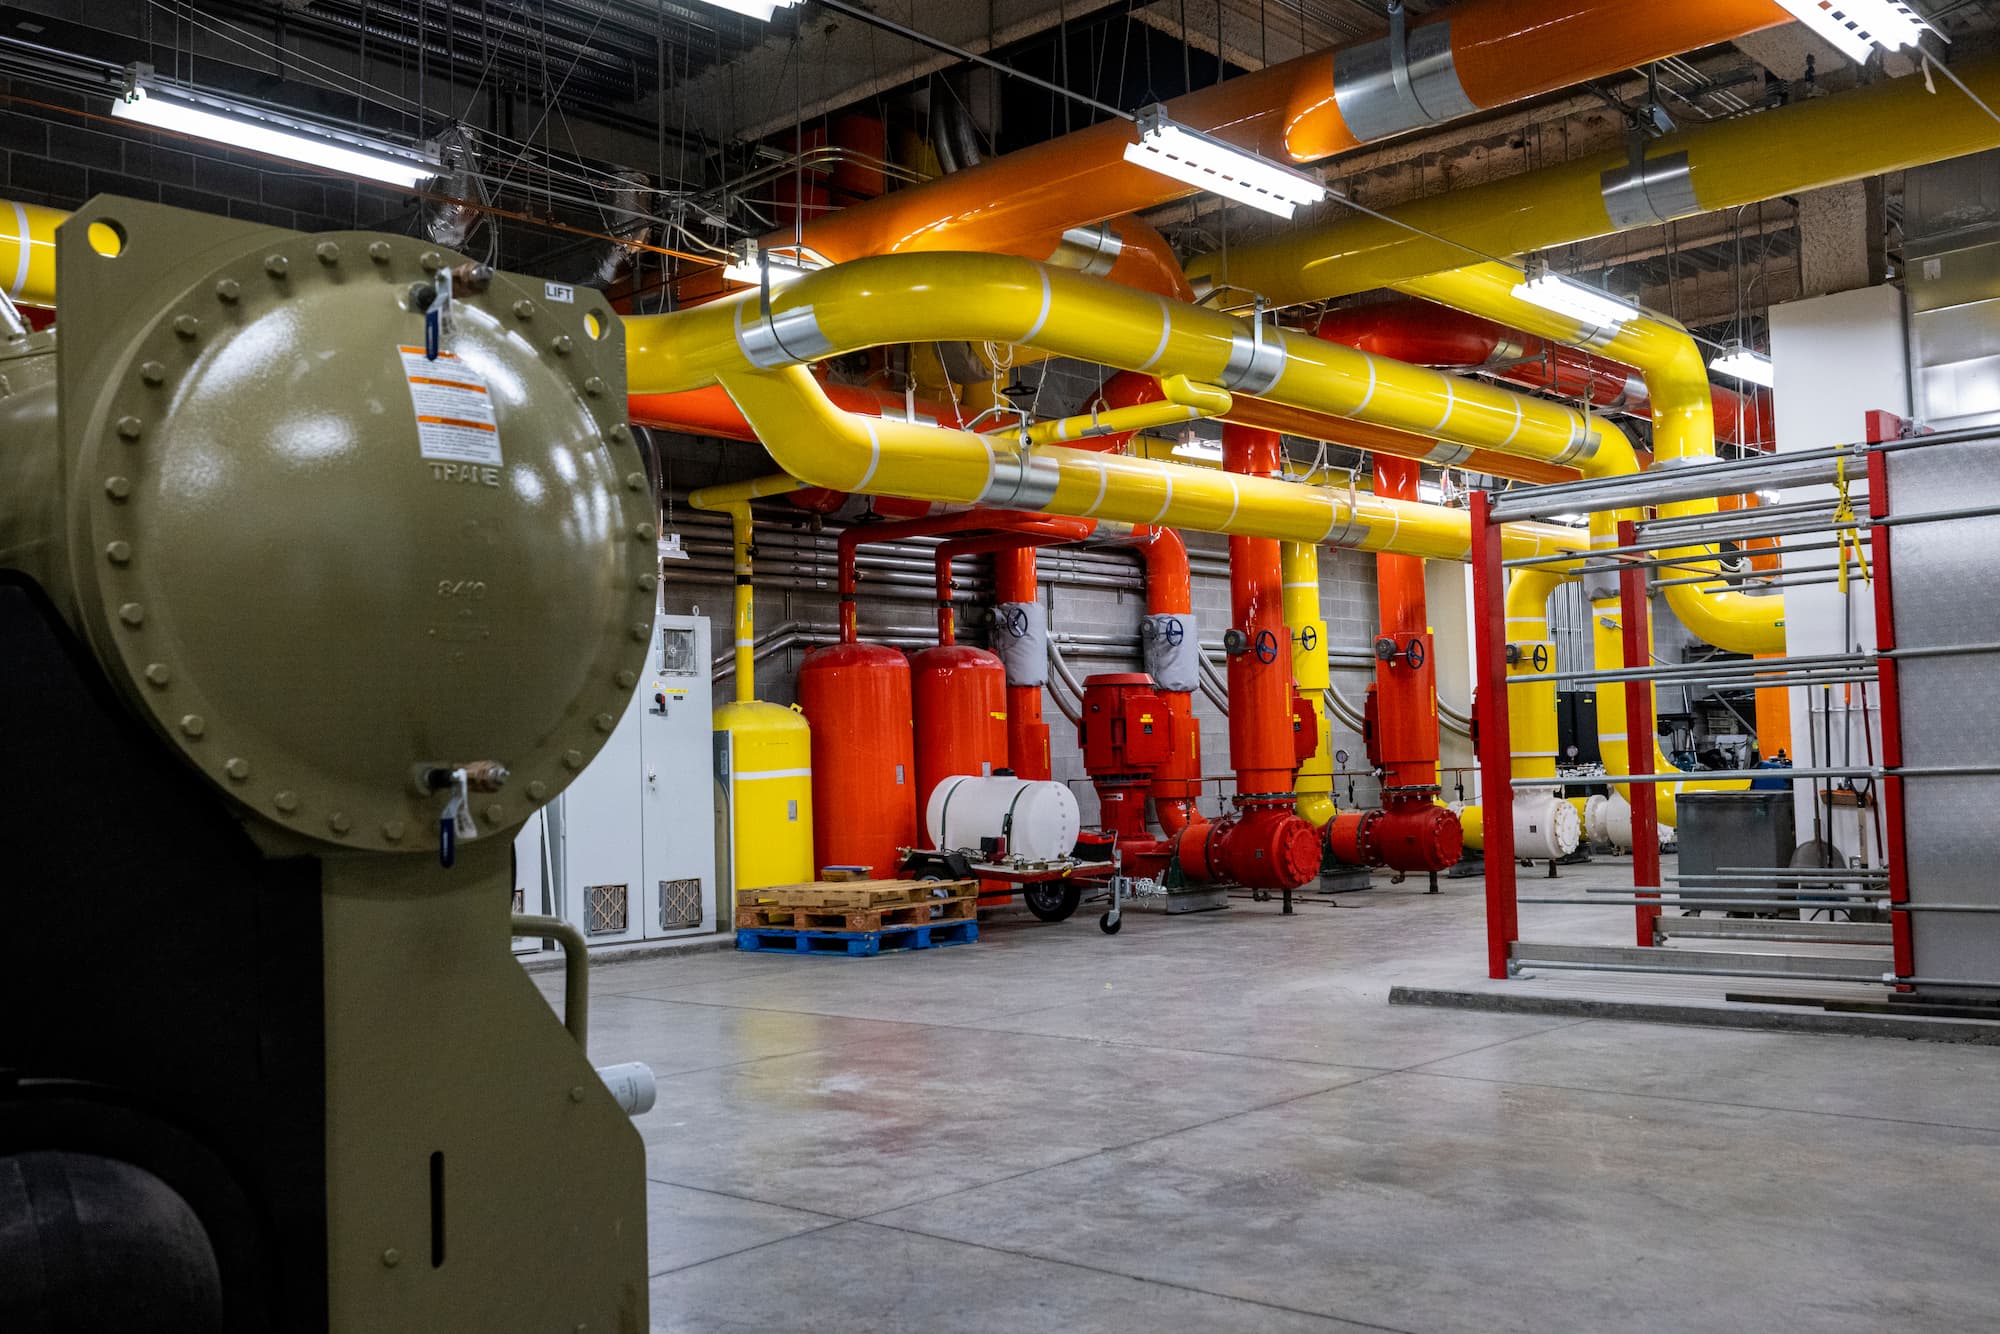 An HVAC tech room, with multicolored pipes and various equipment.